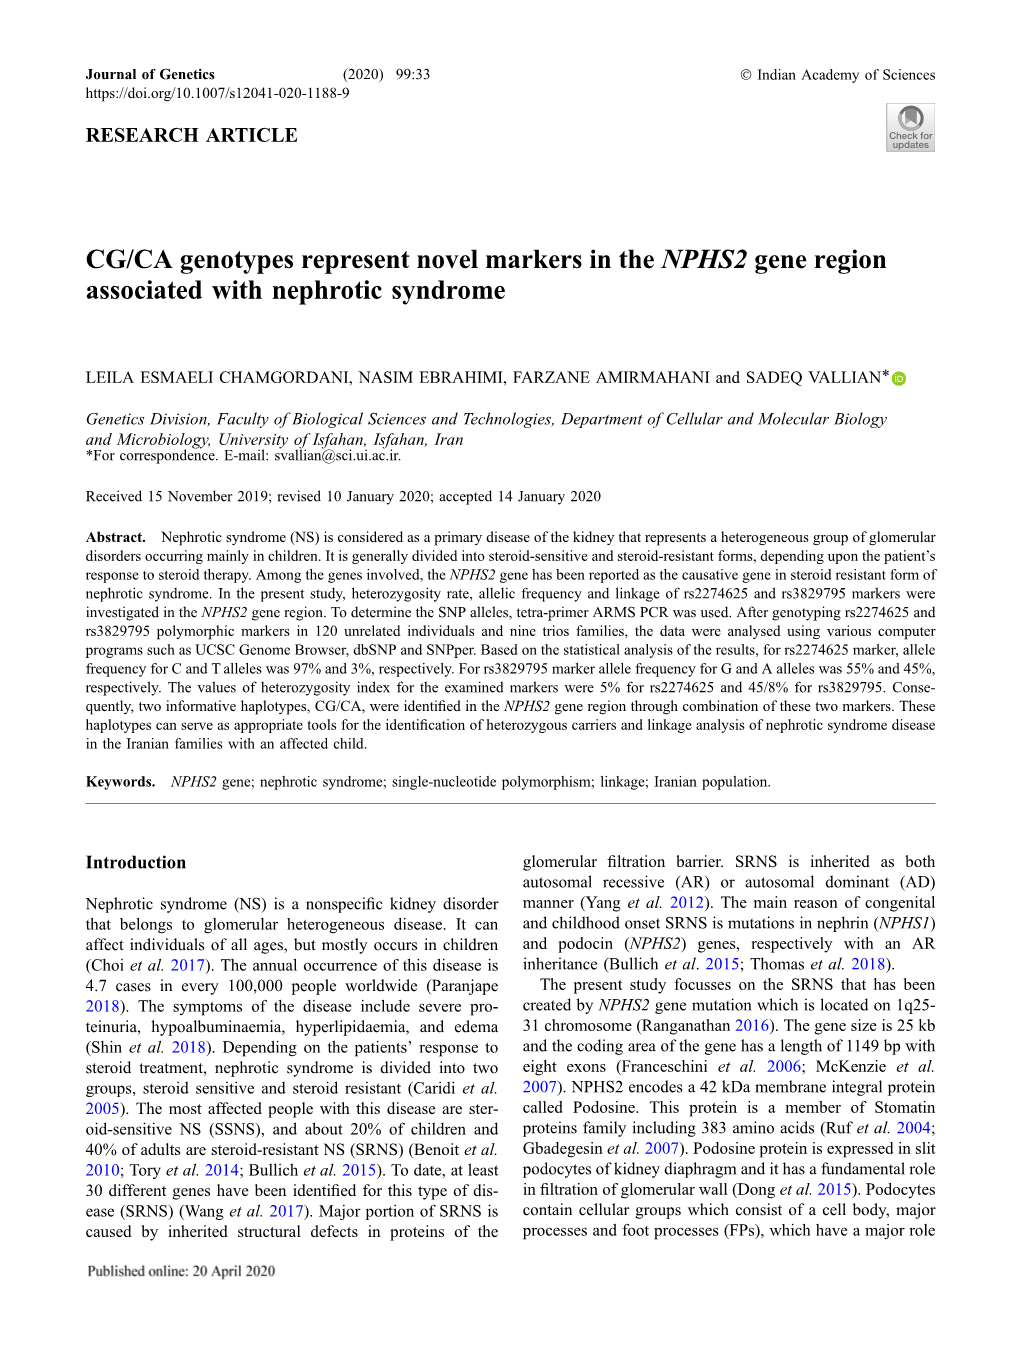 CG/CA Genotypes Represent Novel Markers in the NPHS2 Gene Region Associated with Nephrotic Syndrome